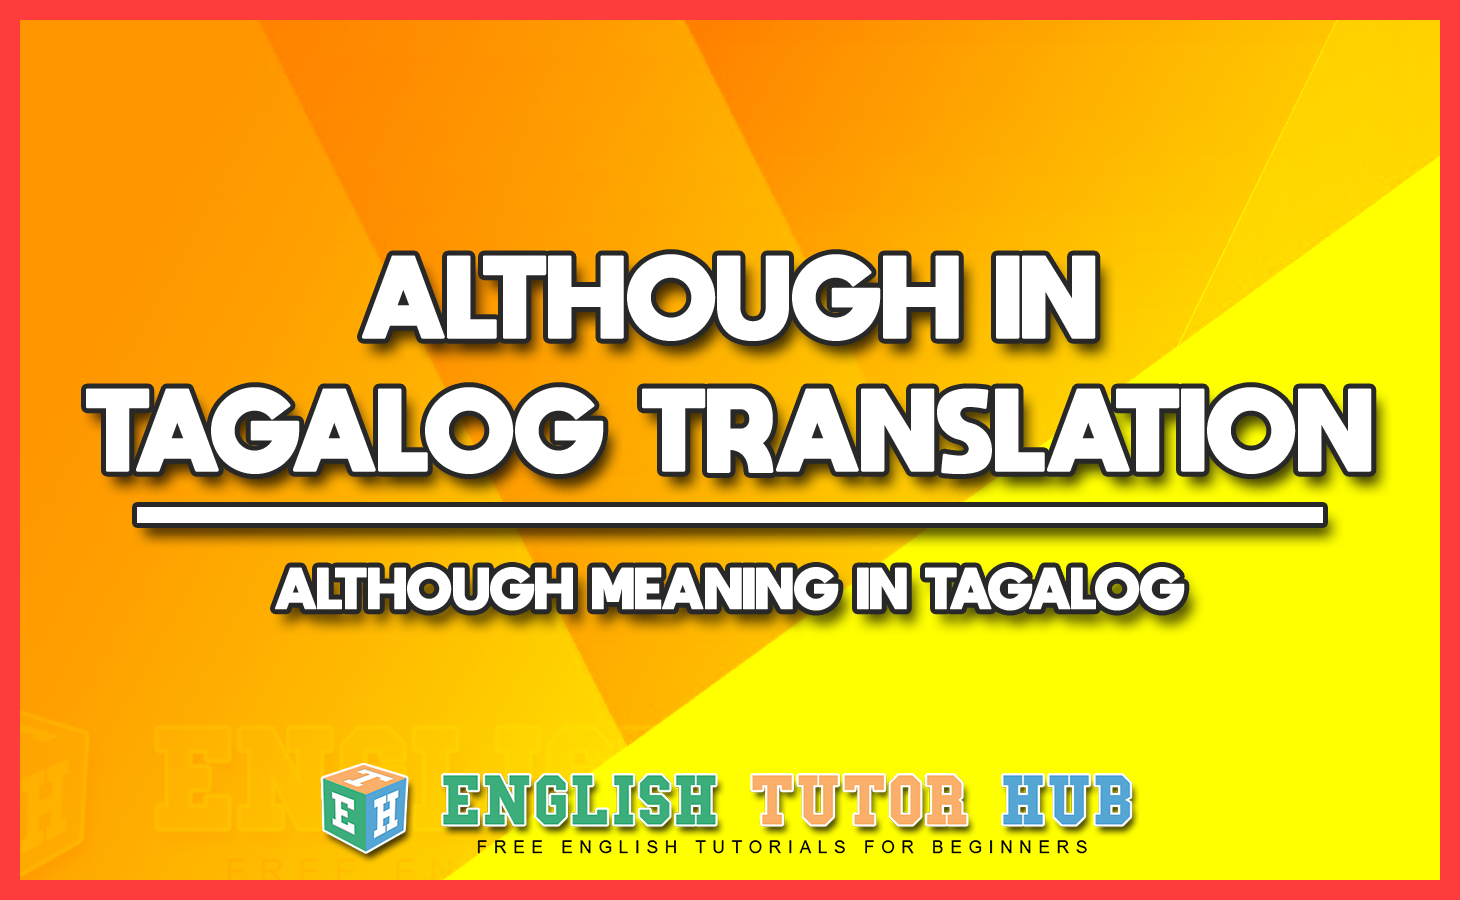 ALTHOUGH IN TAGALOG TRANSLATION - ALTHOUGH MEANING IN TAGALOG